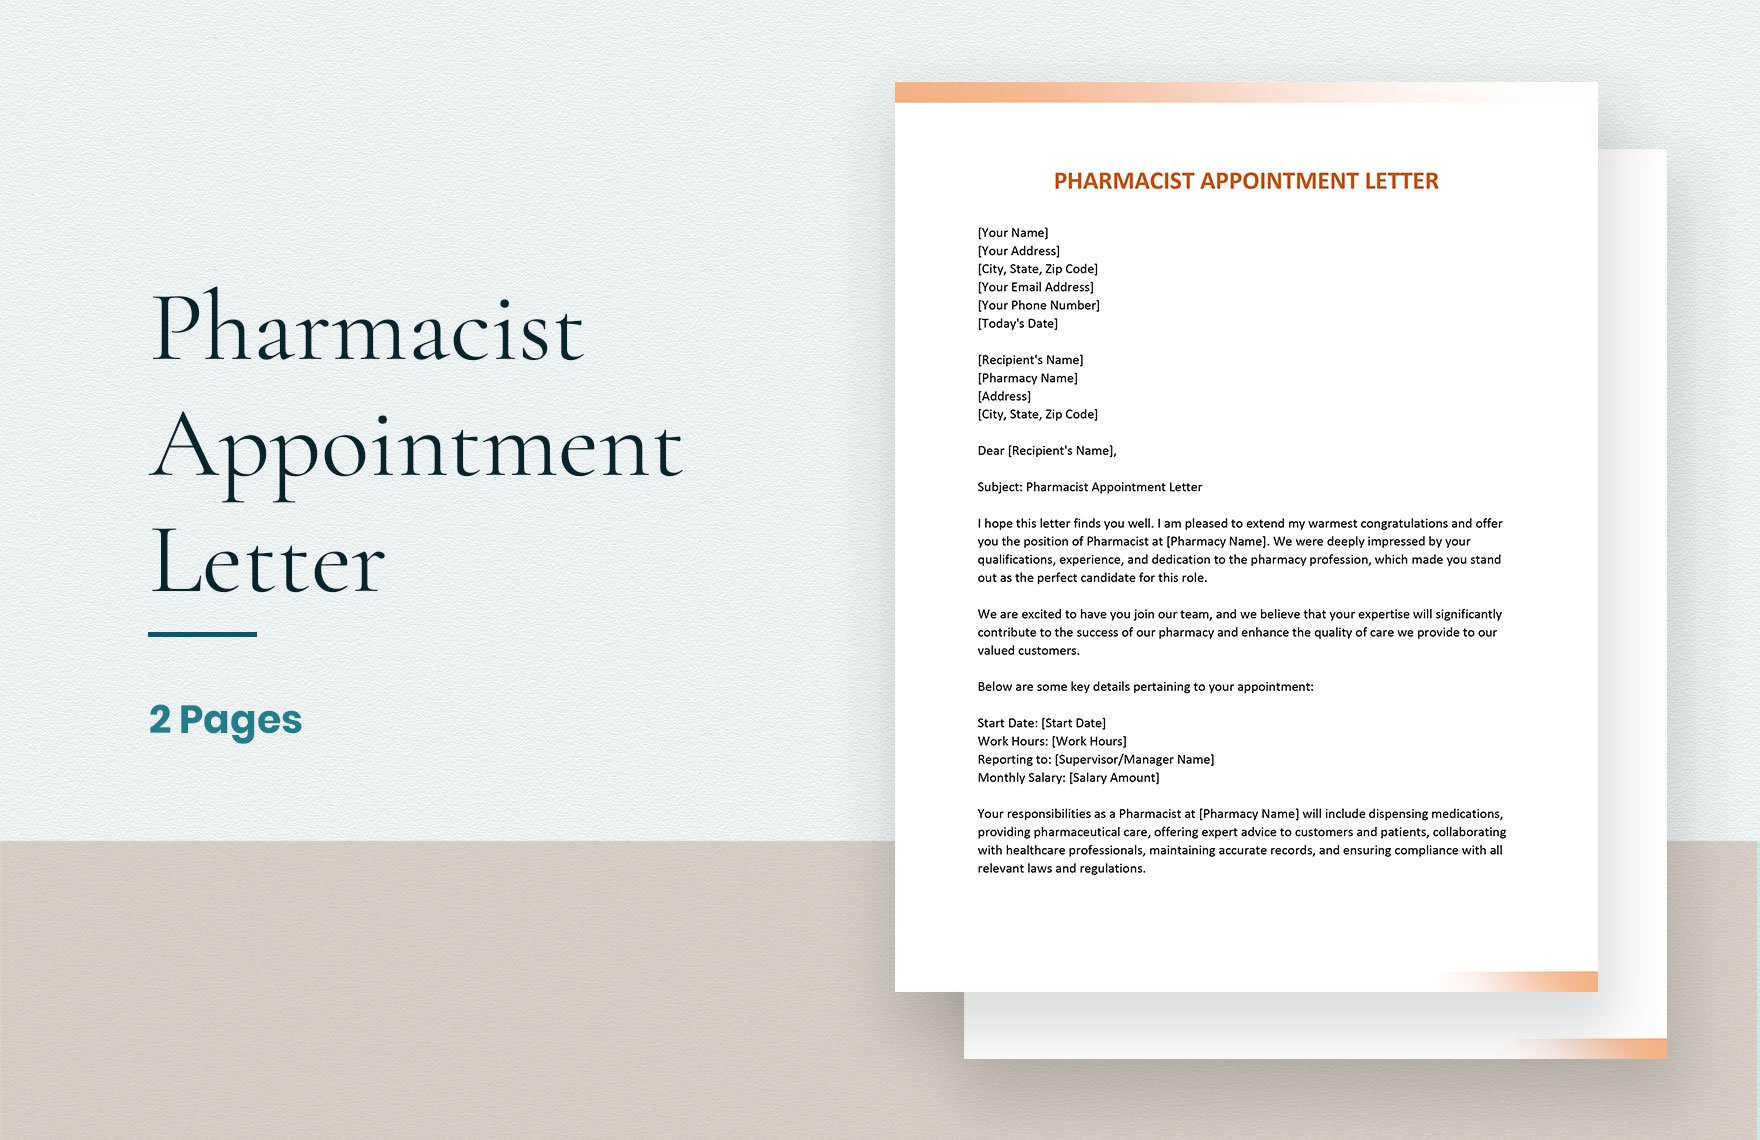 Pharmacist Appointment Letter